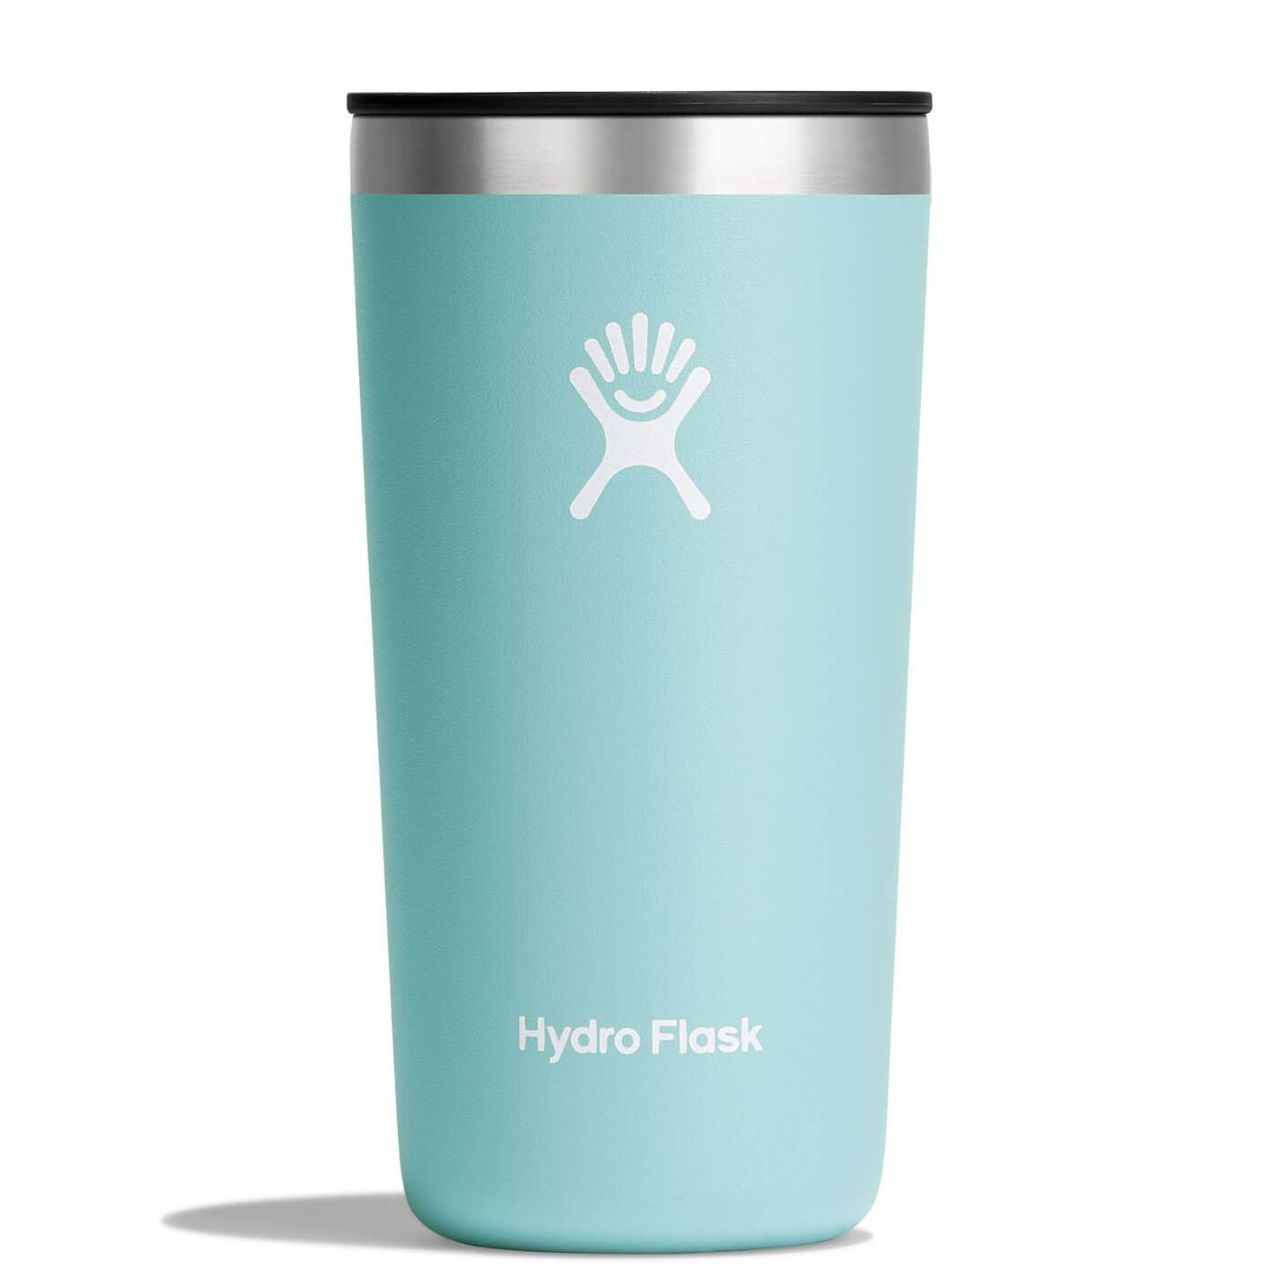 Hydroflask 12 oz Insulated Cooler Cup – Wilderness Sports, Inc.